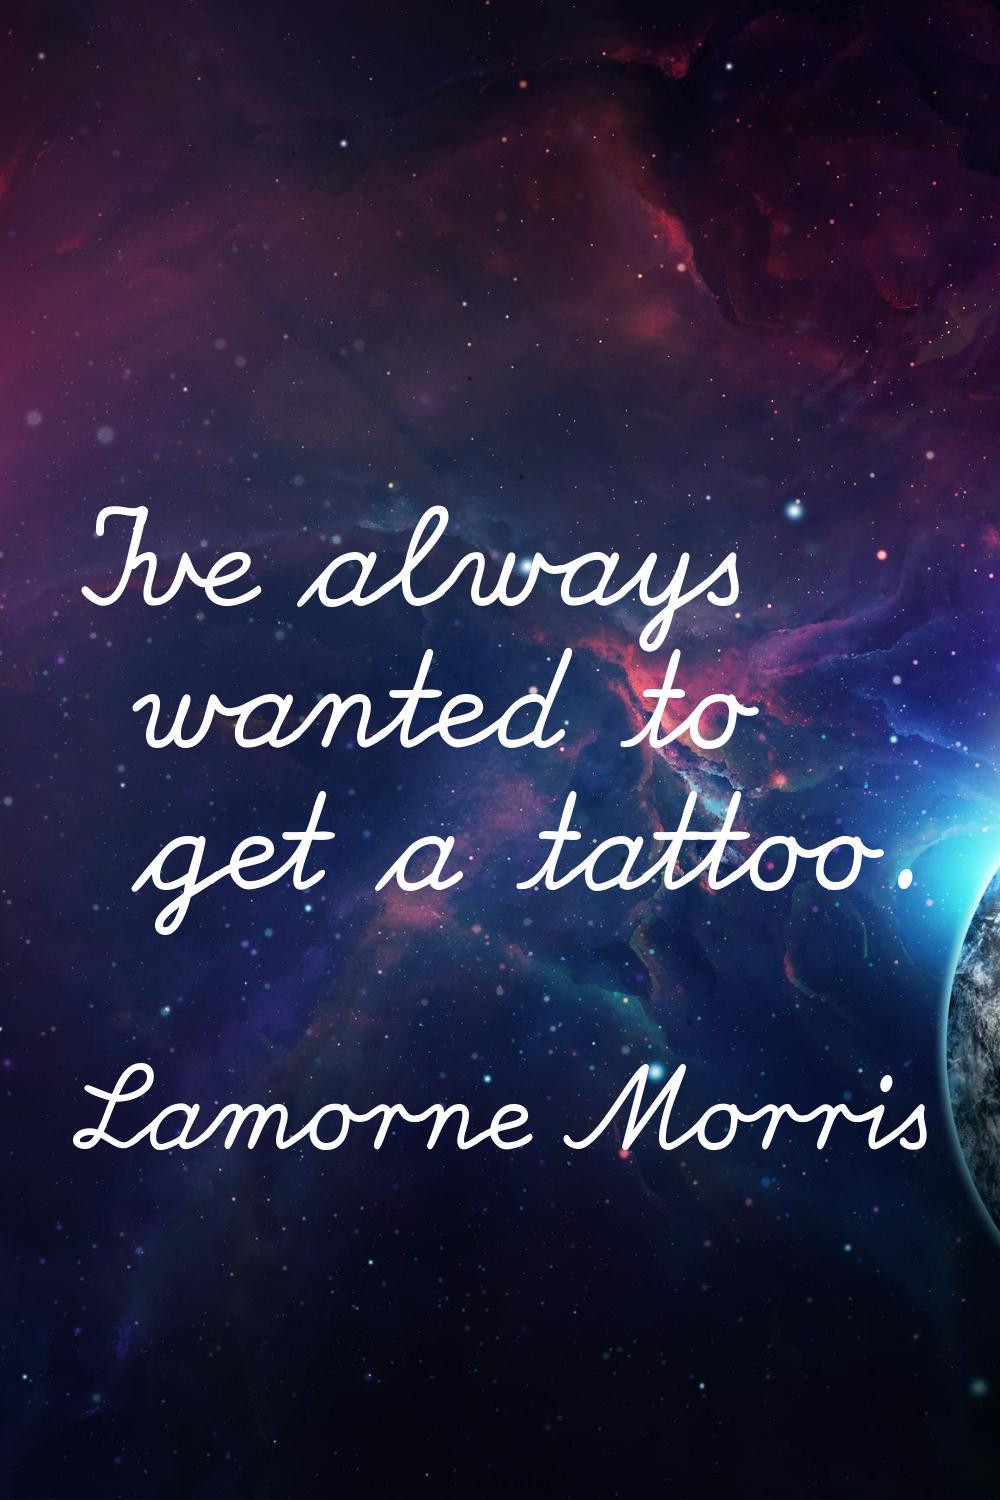 I've always wanted to get a tattoo.